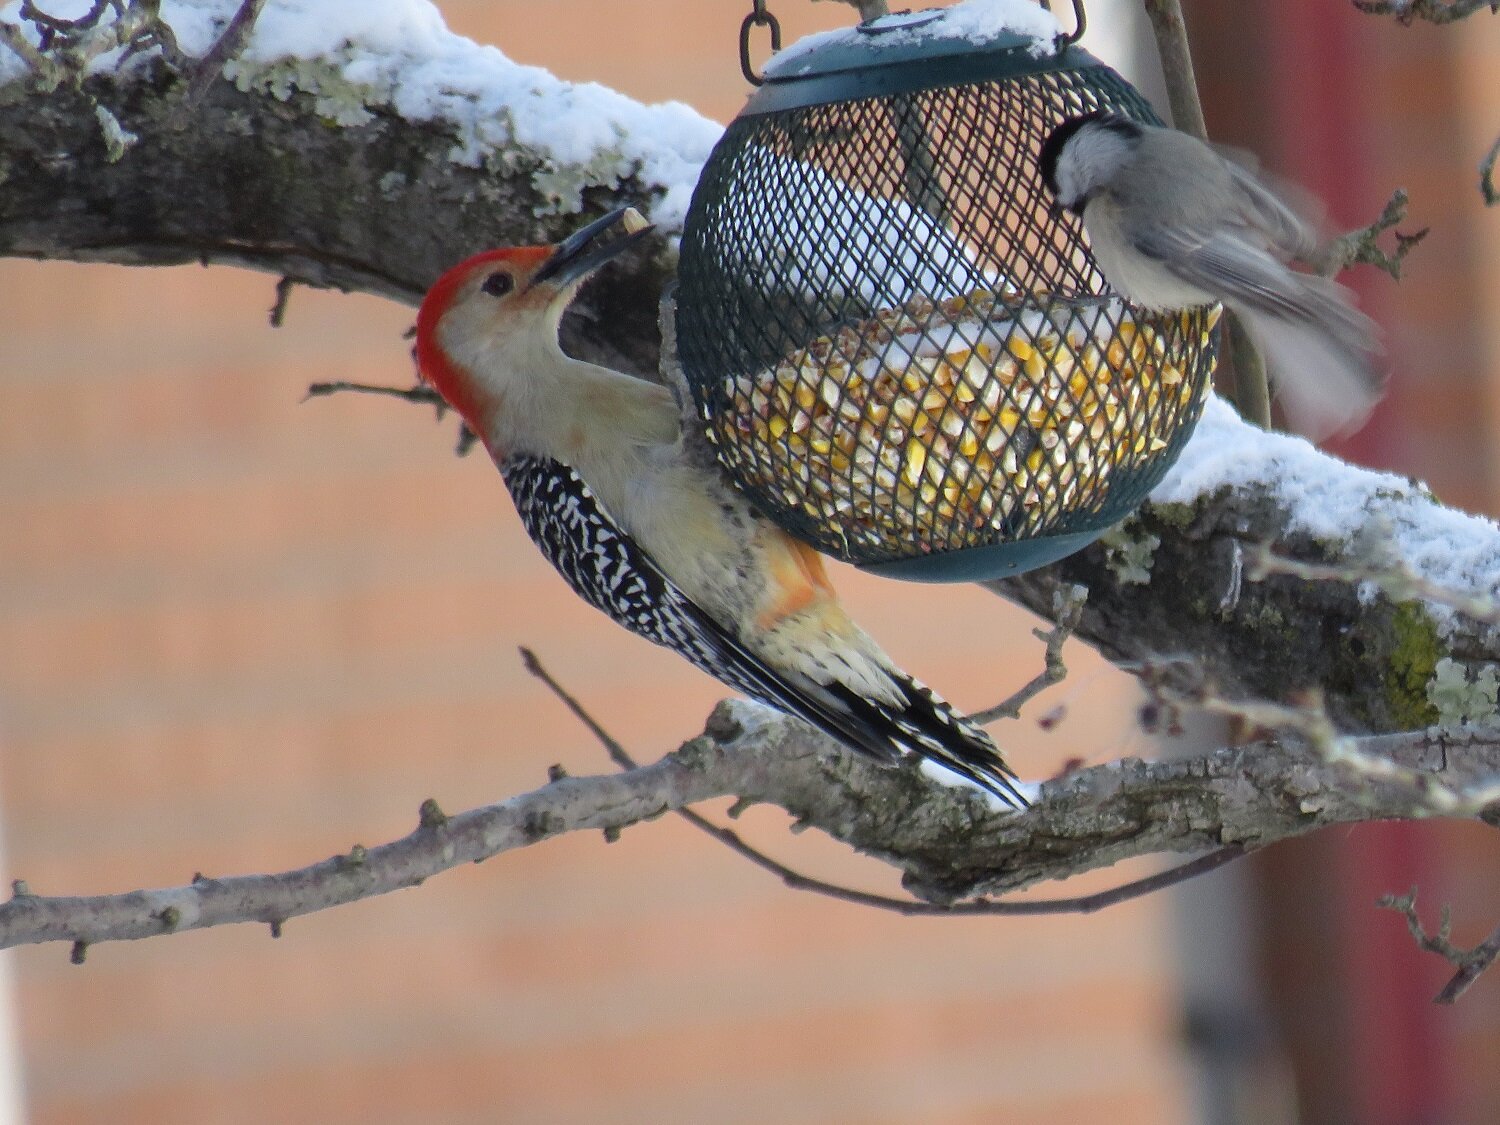  A rare moment — a red-bellied woodpecker sharing the birdfeeder! 